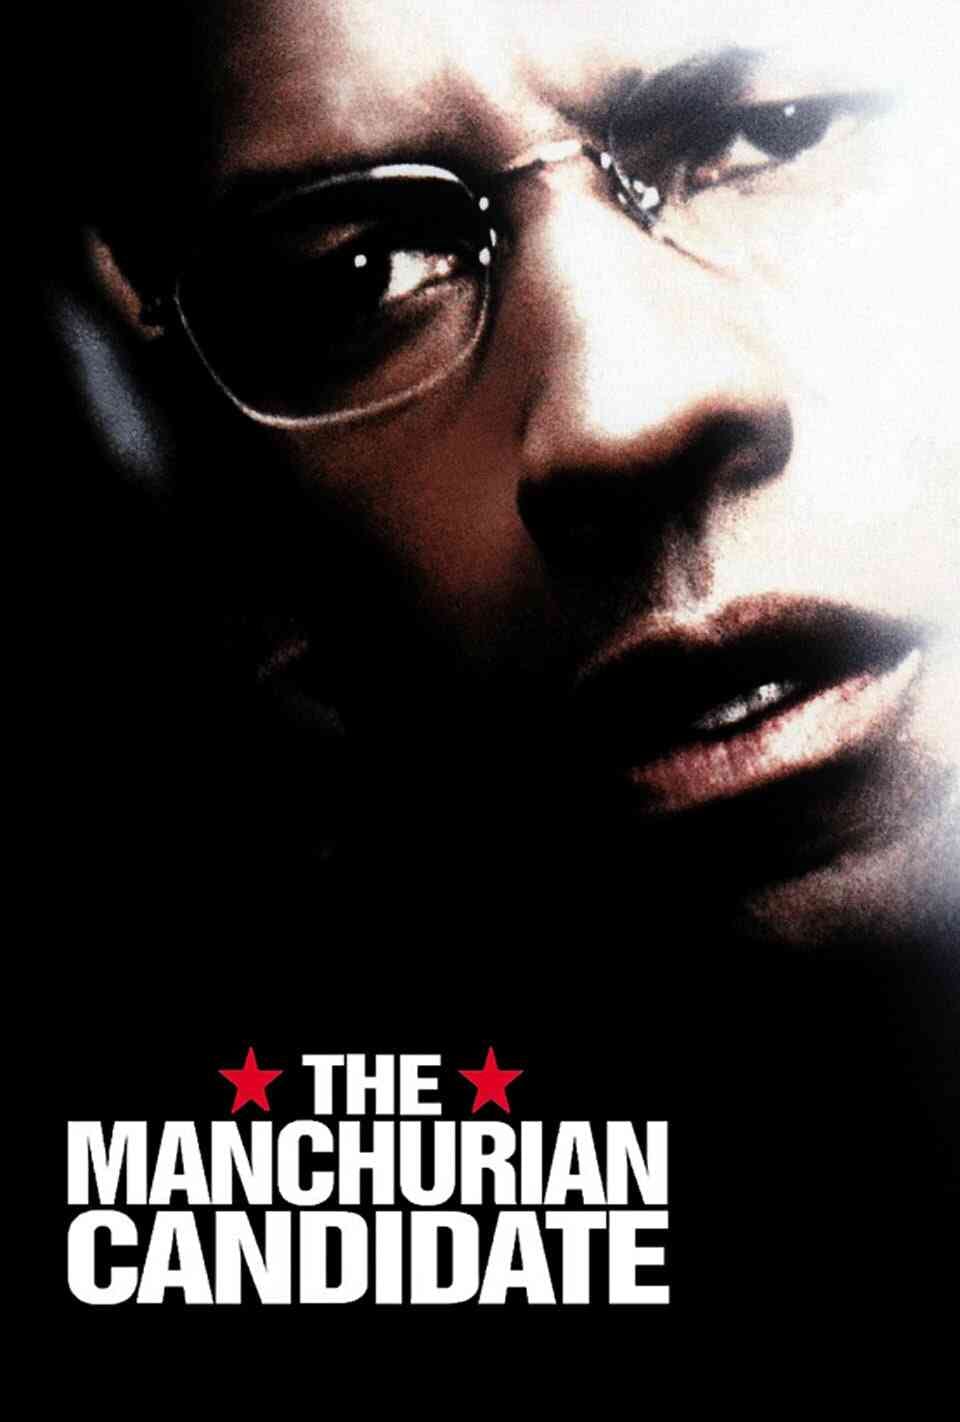 Read The Manchurian Candidate screenplay (poster)